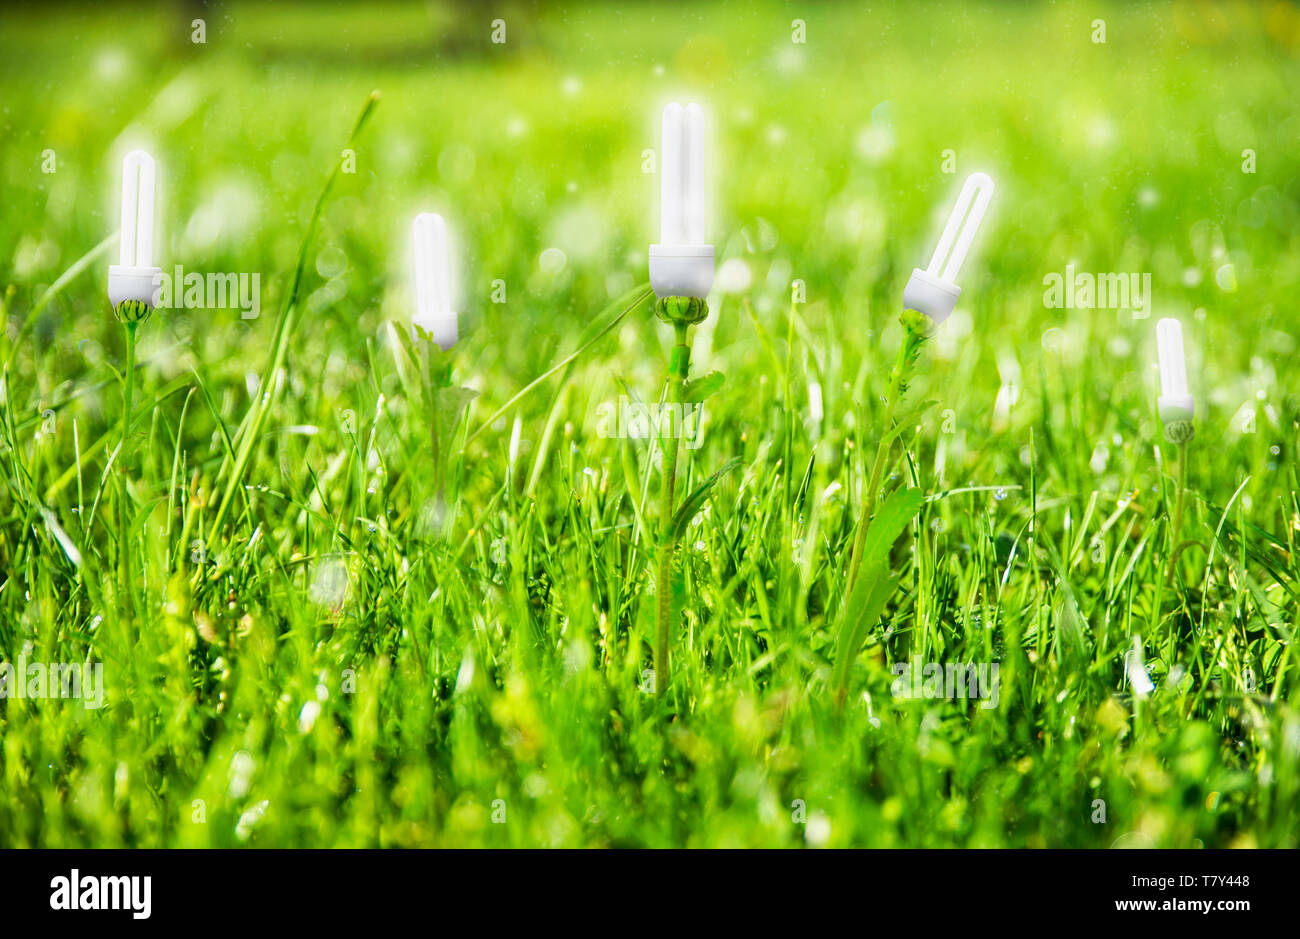 Renevable energy, lightbulb concept on meadow with grass Stock Photo